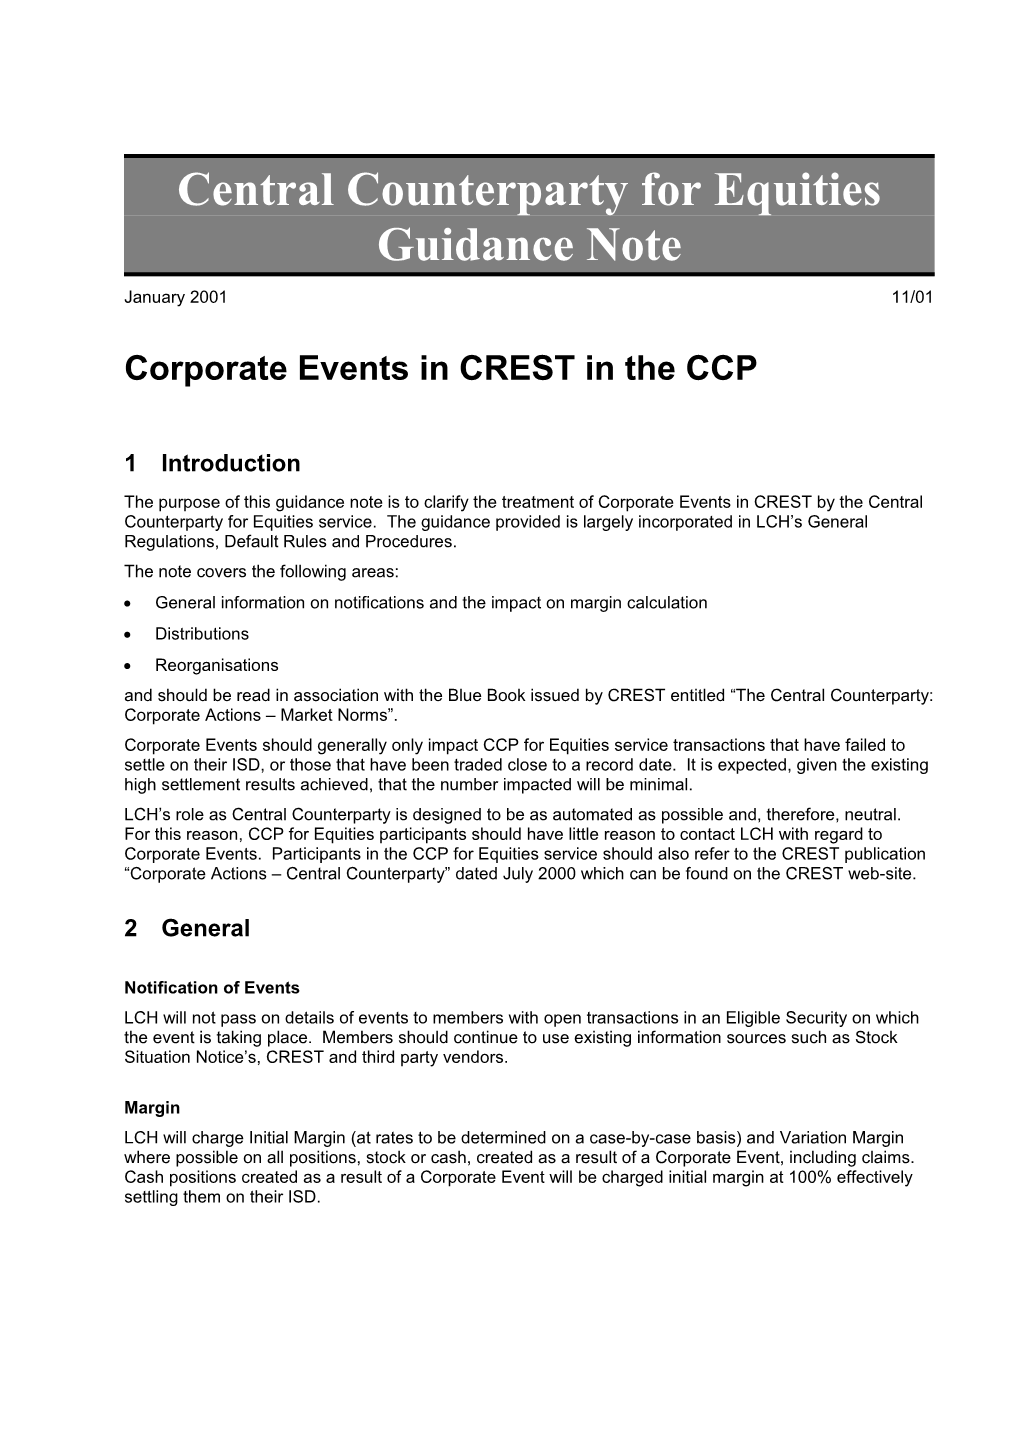 Central Counterparty for Equities Guidance Note Jan 2001, 11/01